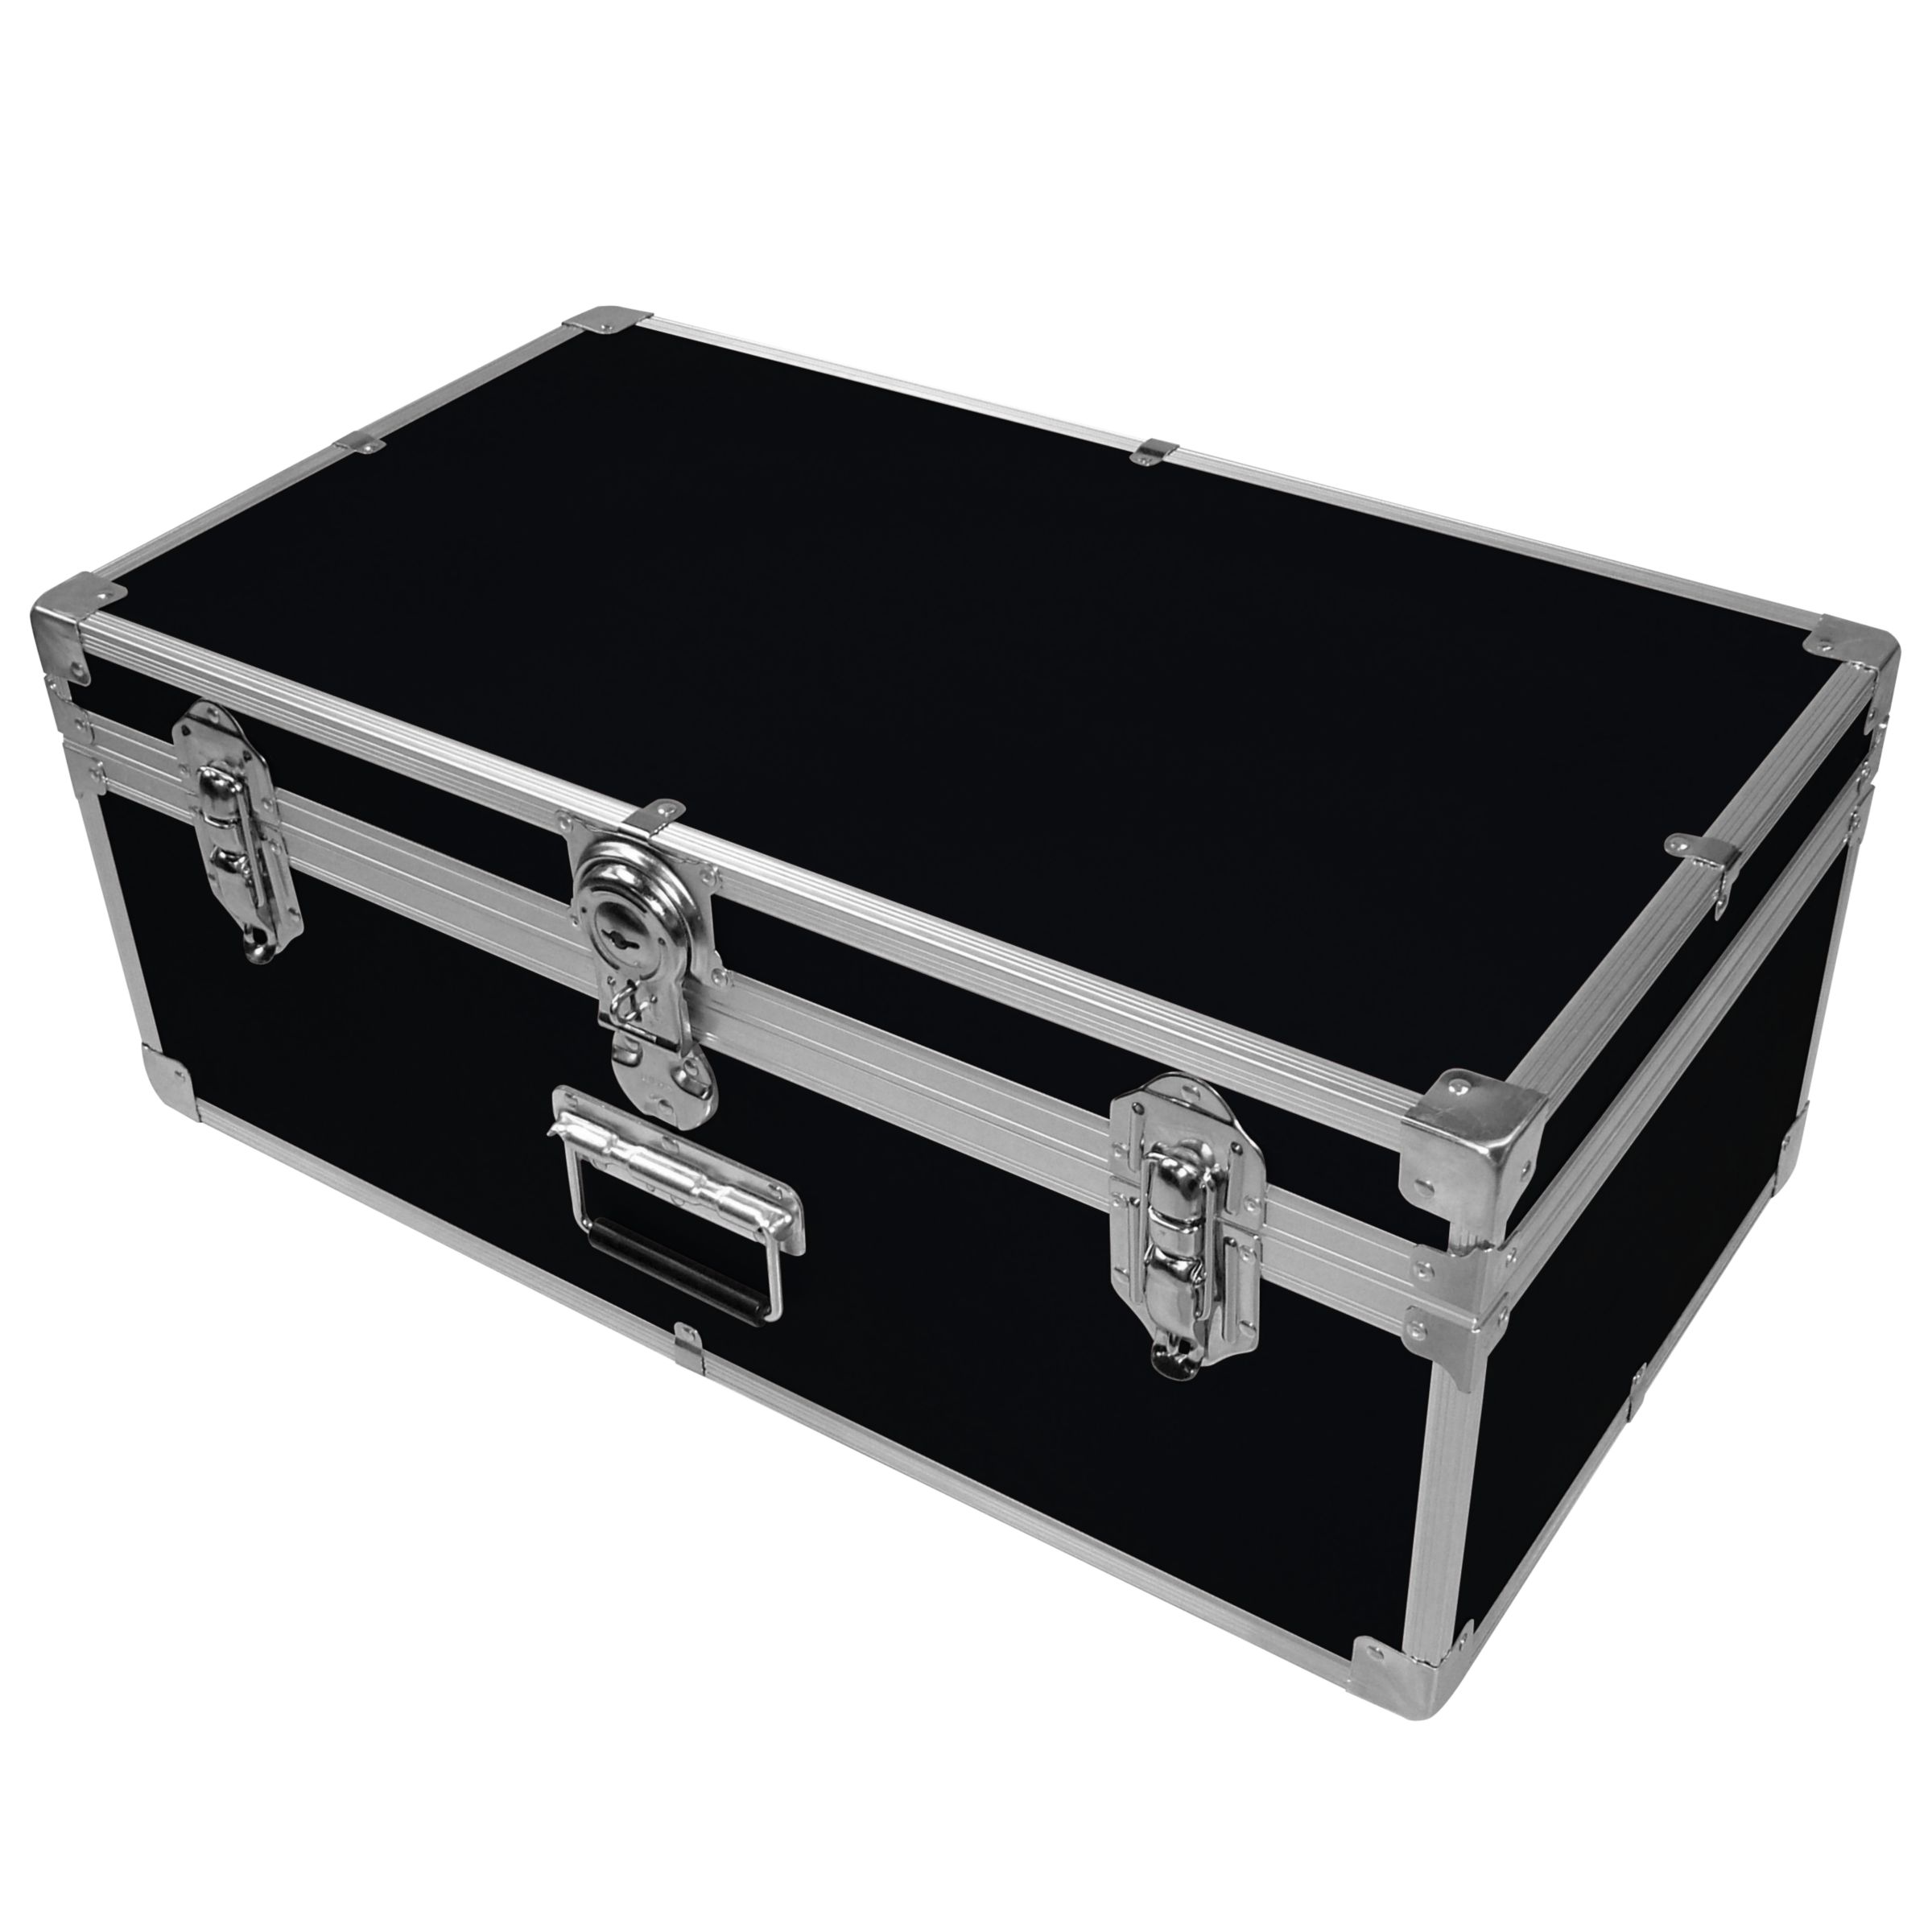 John Lewis Fortified Attache Trunk, Black at JohnLewis